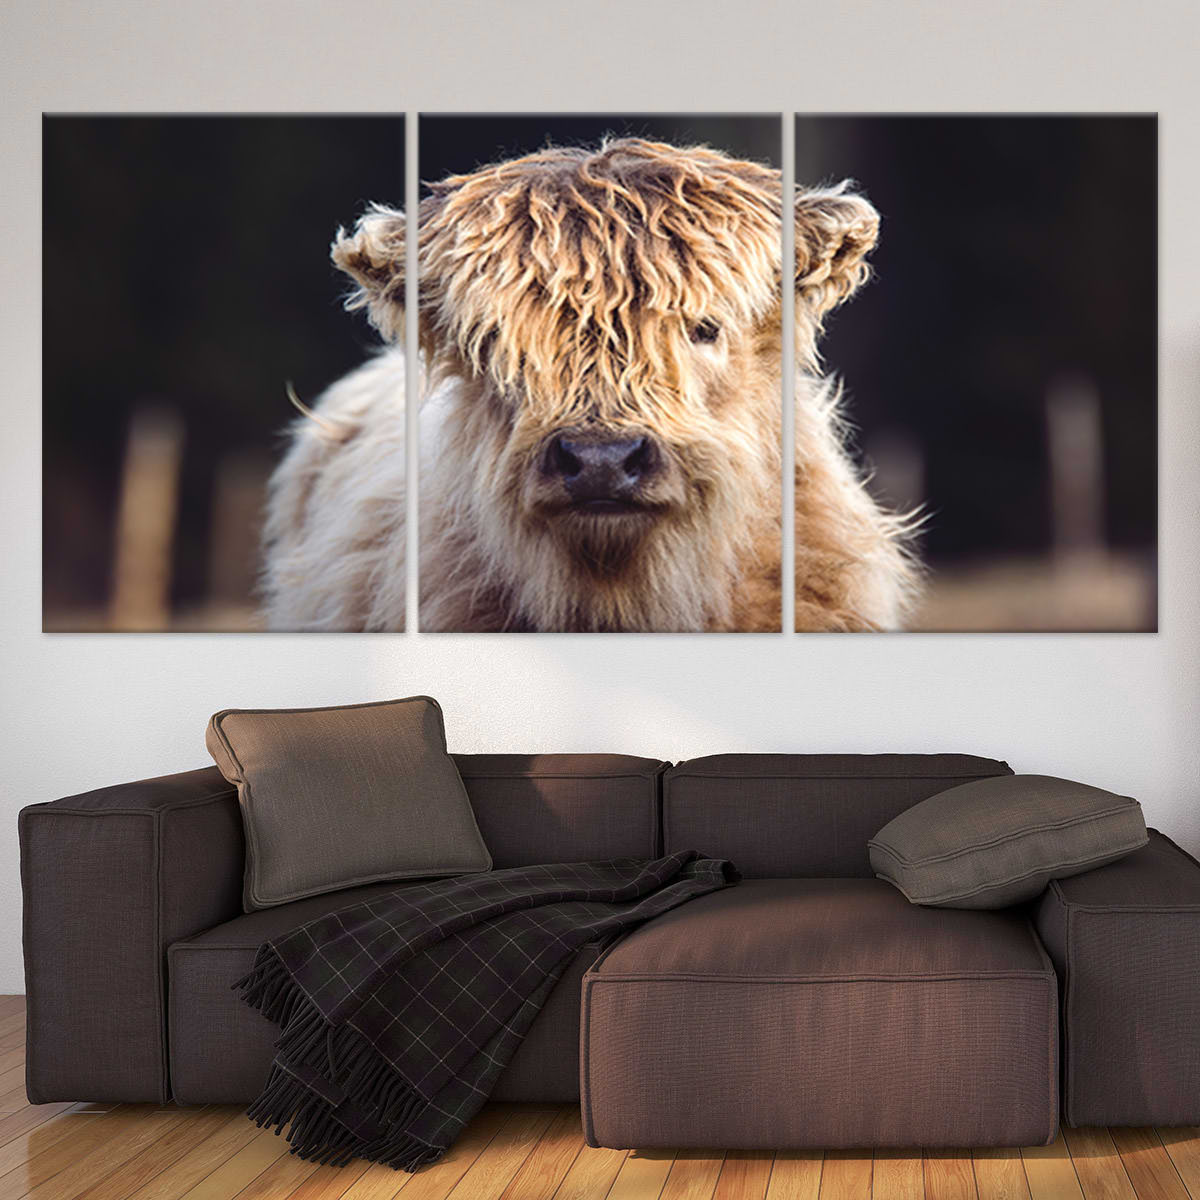 Highland Cow Print Removable Wallpaper Longhorn Wall Art Bedroom